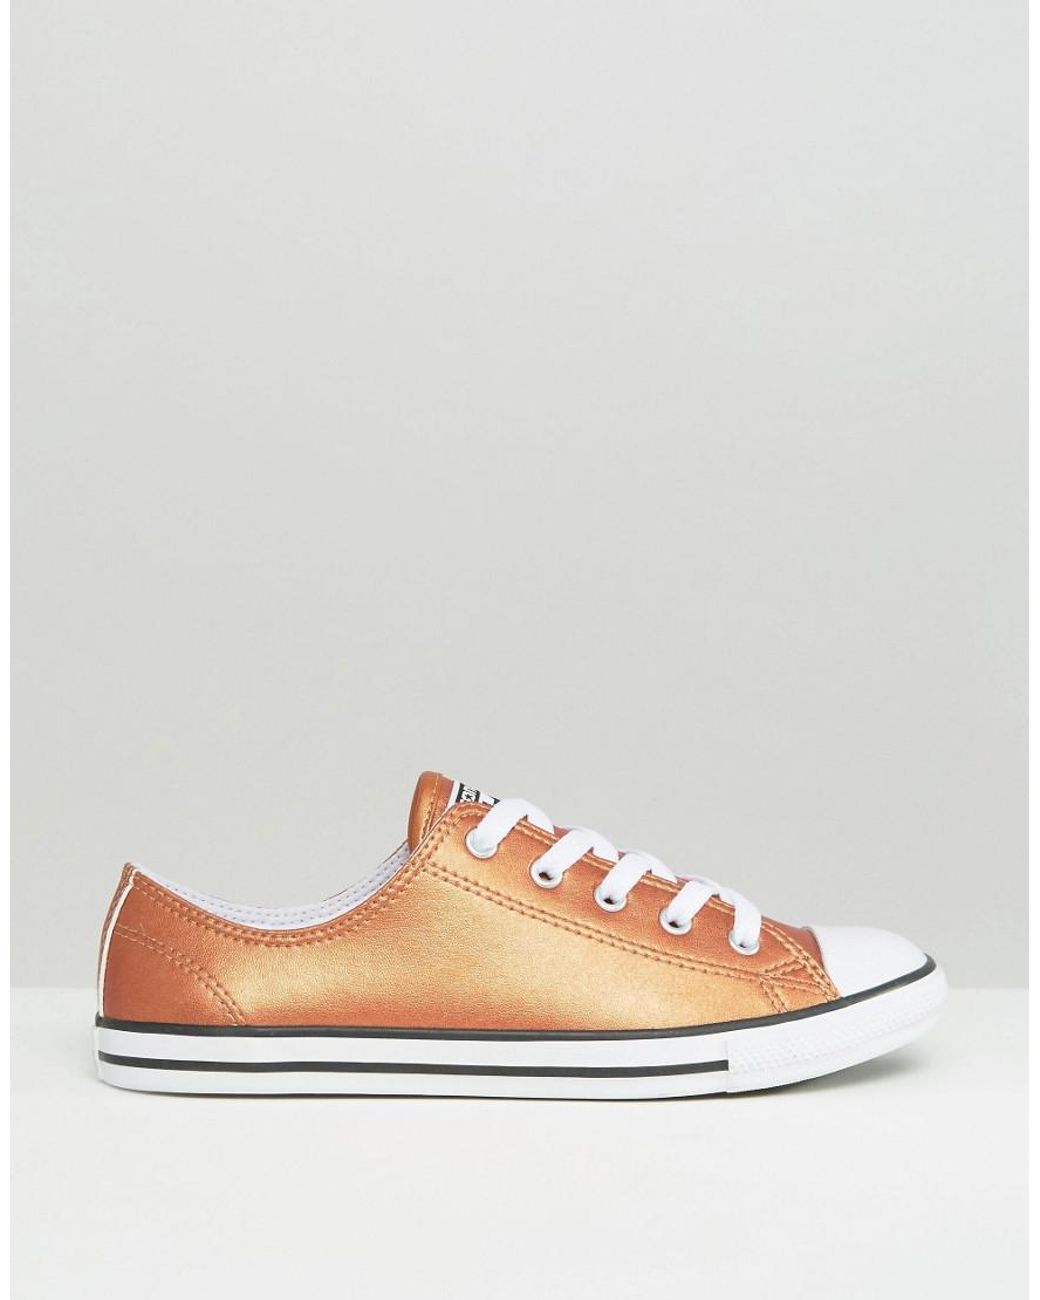 Trágico consumidor viernes Converse All Star Dainty Rose Gold Metallic Trainers | Lyst